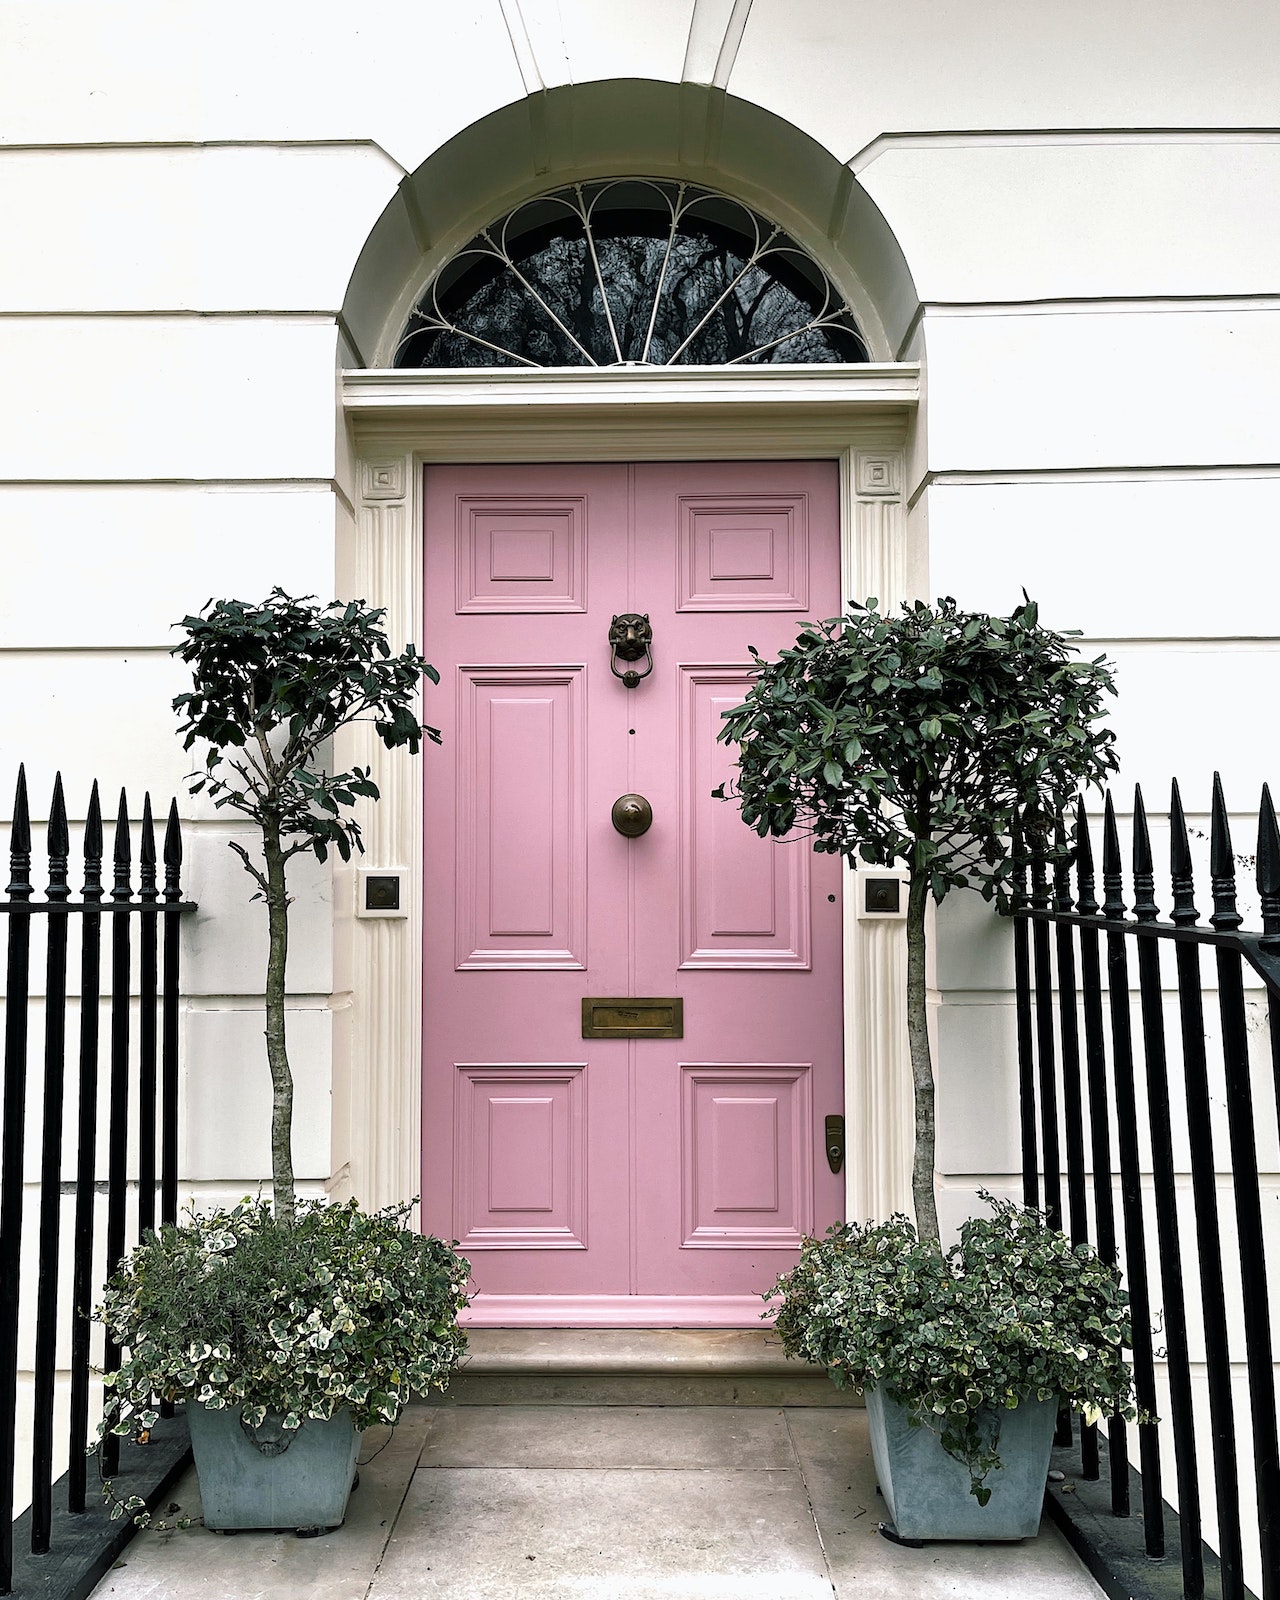 Top Tips For Decorating a Period Property